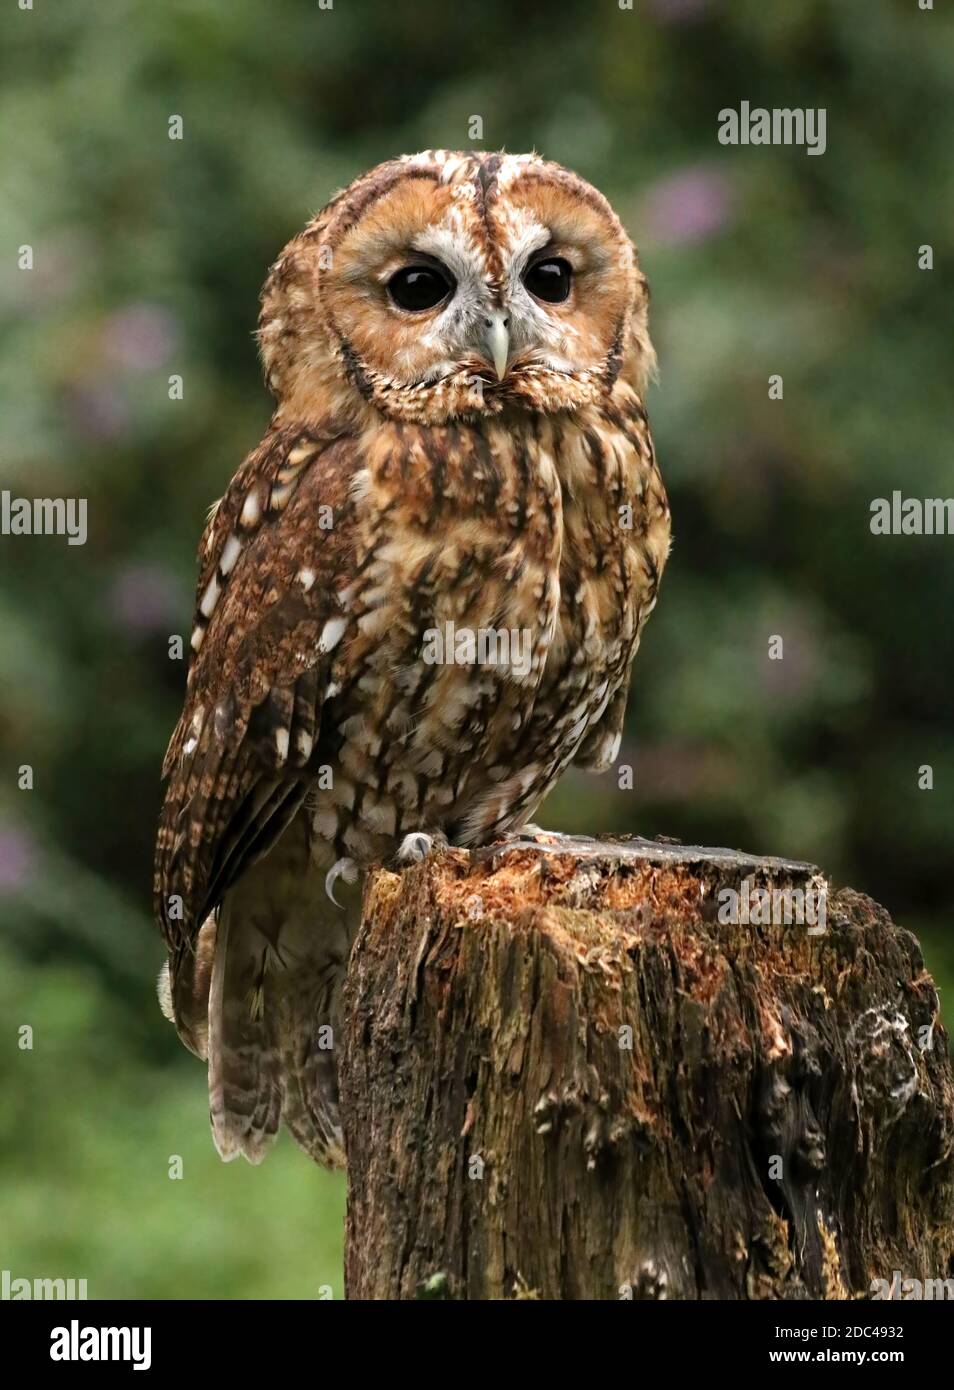 Tawney owl perched on a log watching, facing forward Stock Photo